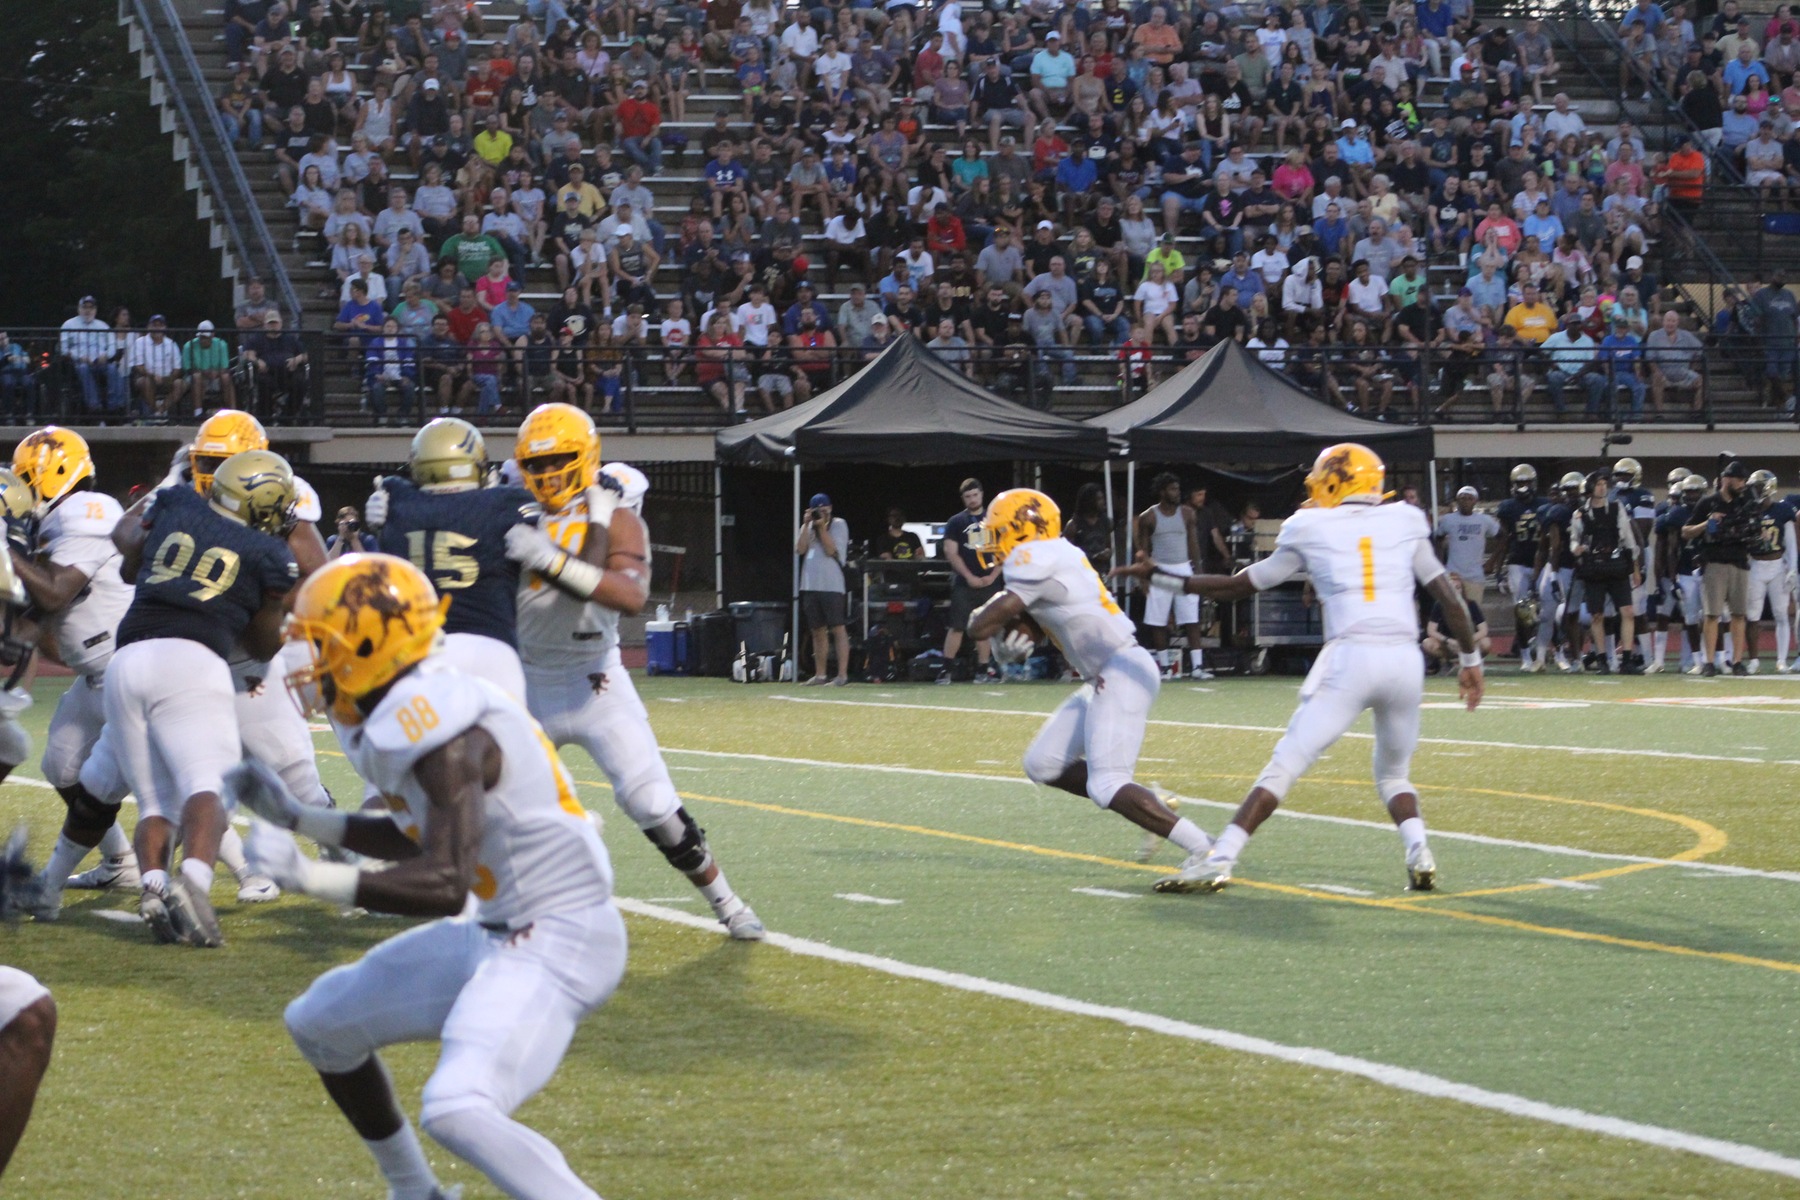 Broncbusters storm back to beat No. 13 Independence